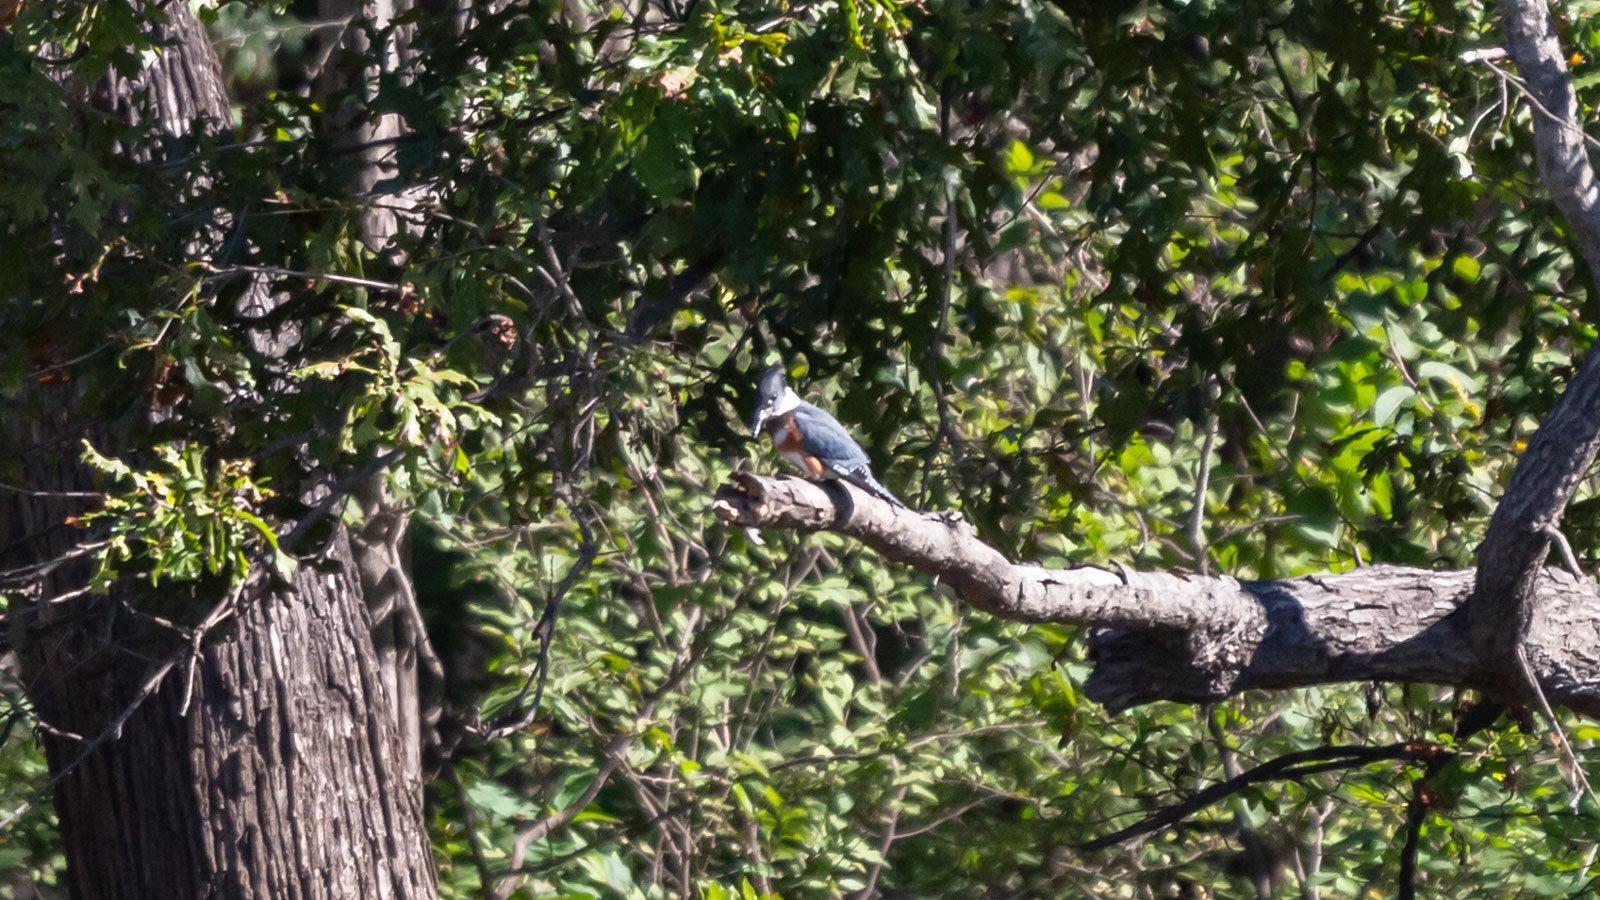 Belted kingfisher looking down